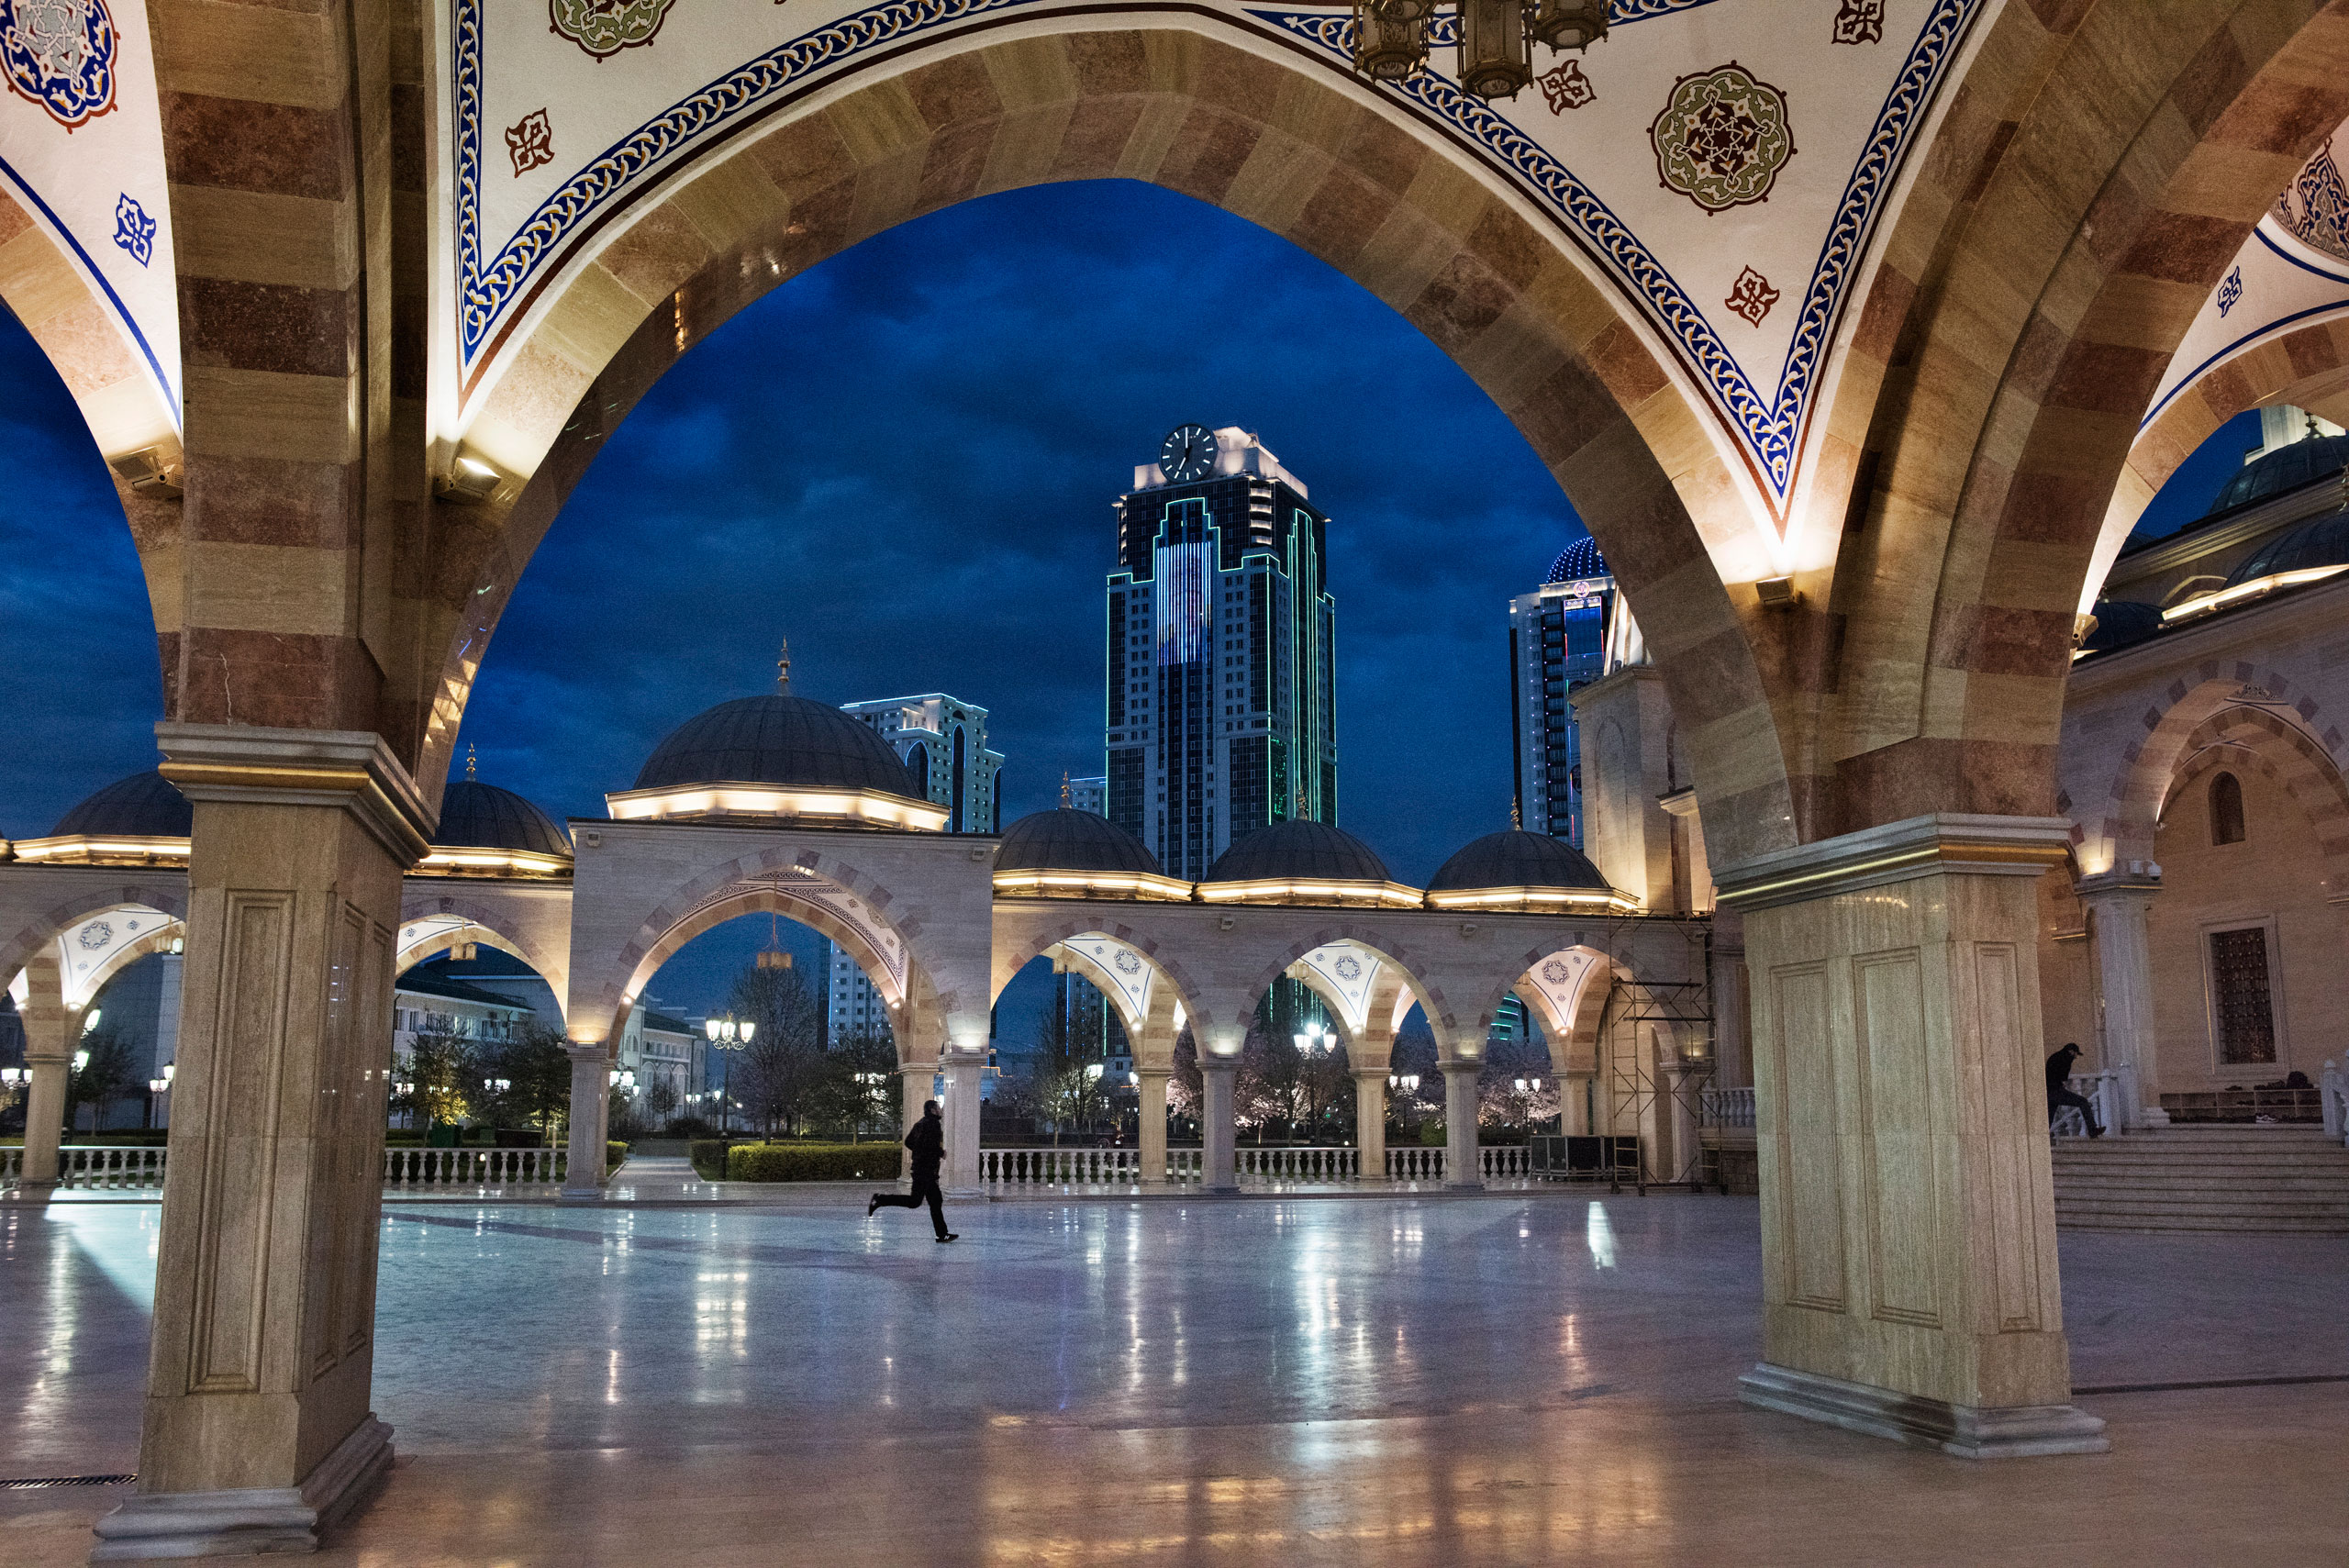 Worshipers hurry into the Heart of Chechnya Mosque for the evening prayer in Grozny, April 2015.